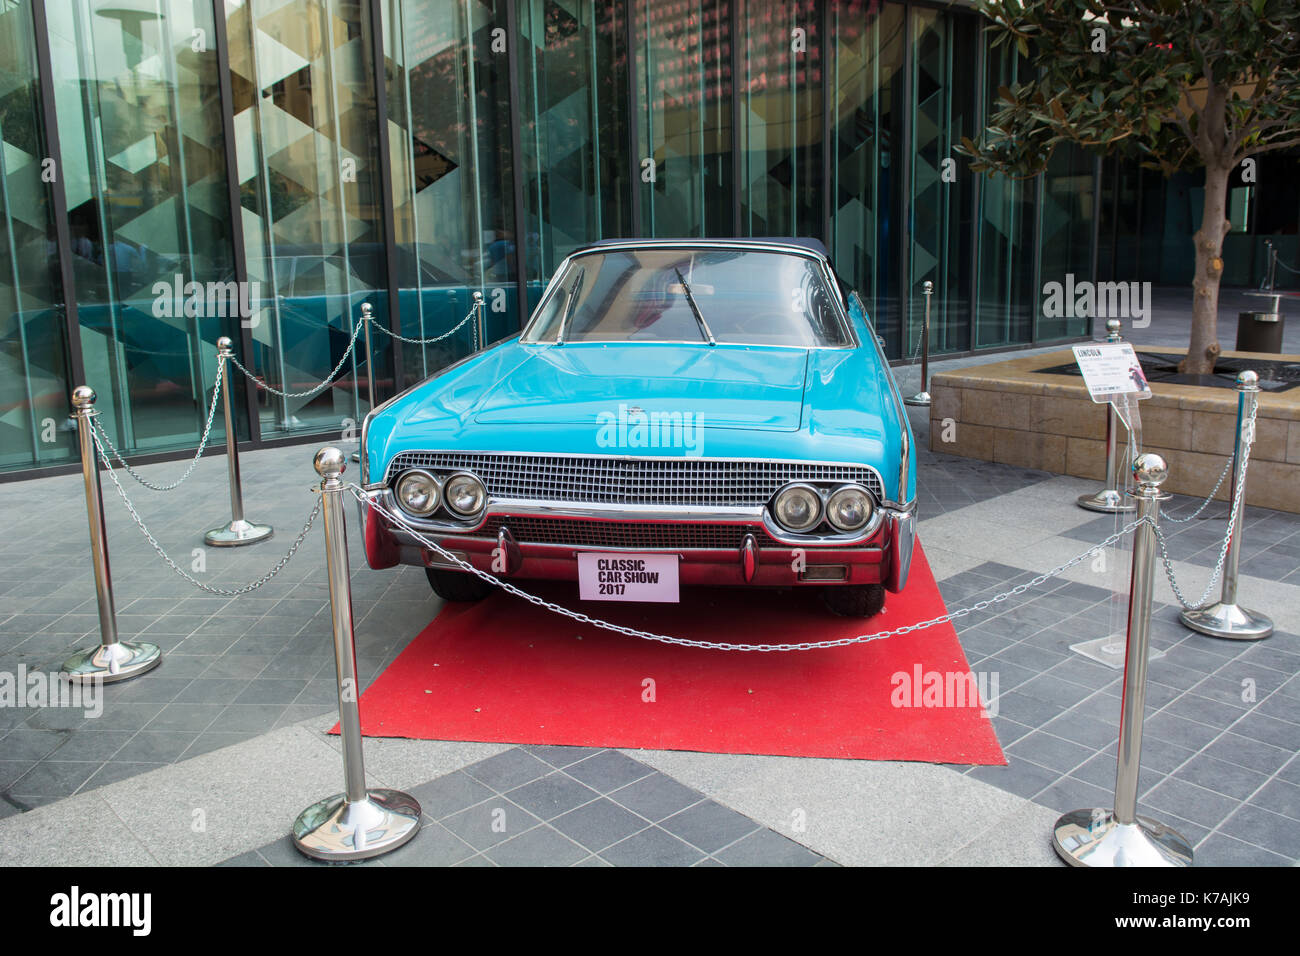 Beirut, Lebanon. 15th Sep, 2017. 1962 Lincoln 4 door convertible on Display at the Classic car show in Beirut Souks, Beirut Lebanon Credit: Mohamad Itani/Alamy Live News Stock Photo